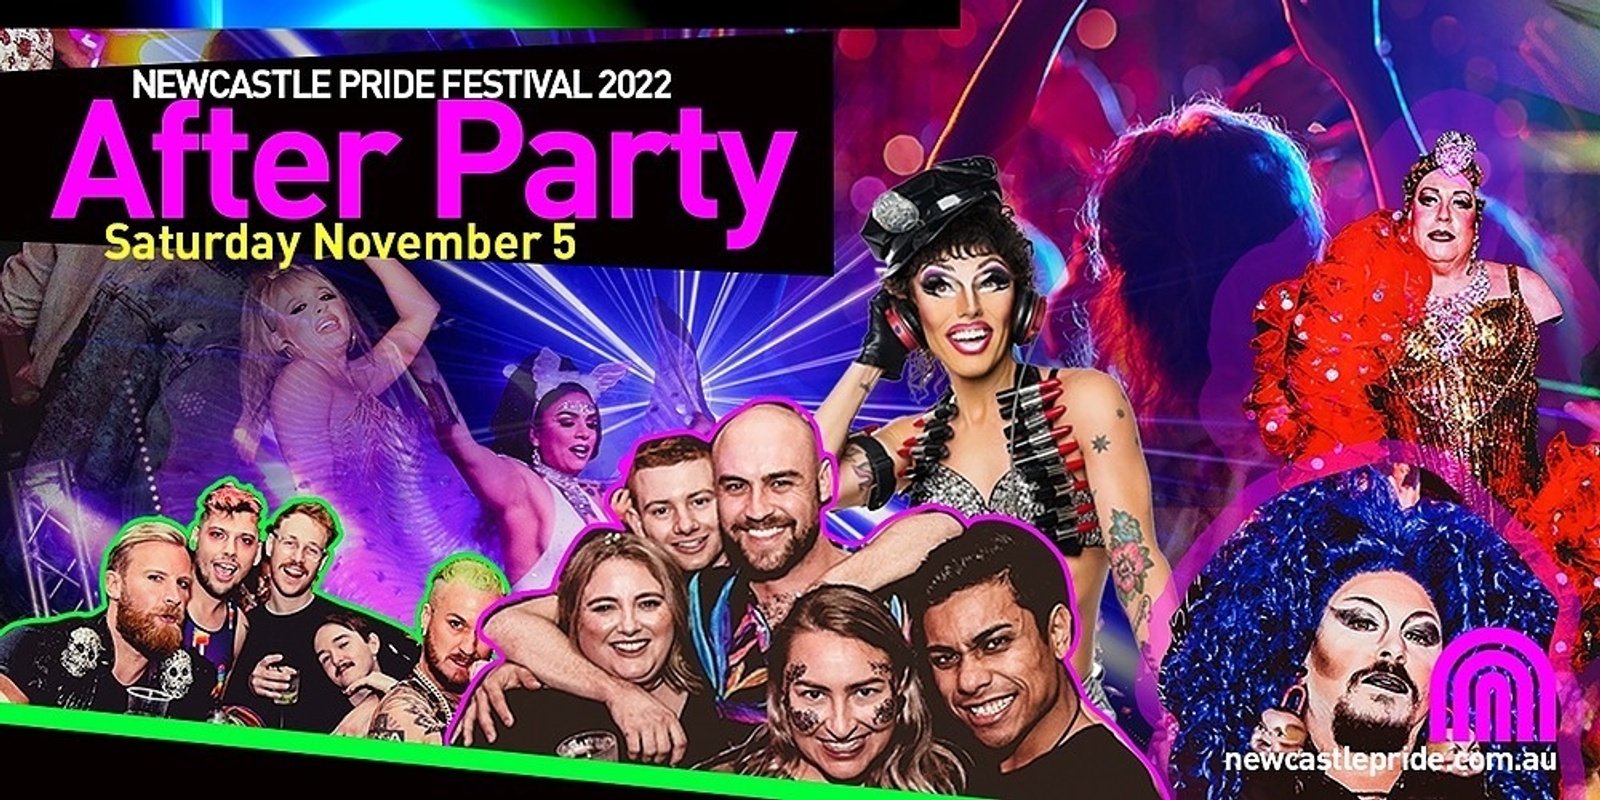 After Party - Newcastle Pride Festival 2022